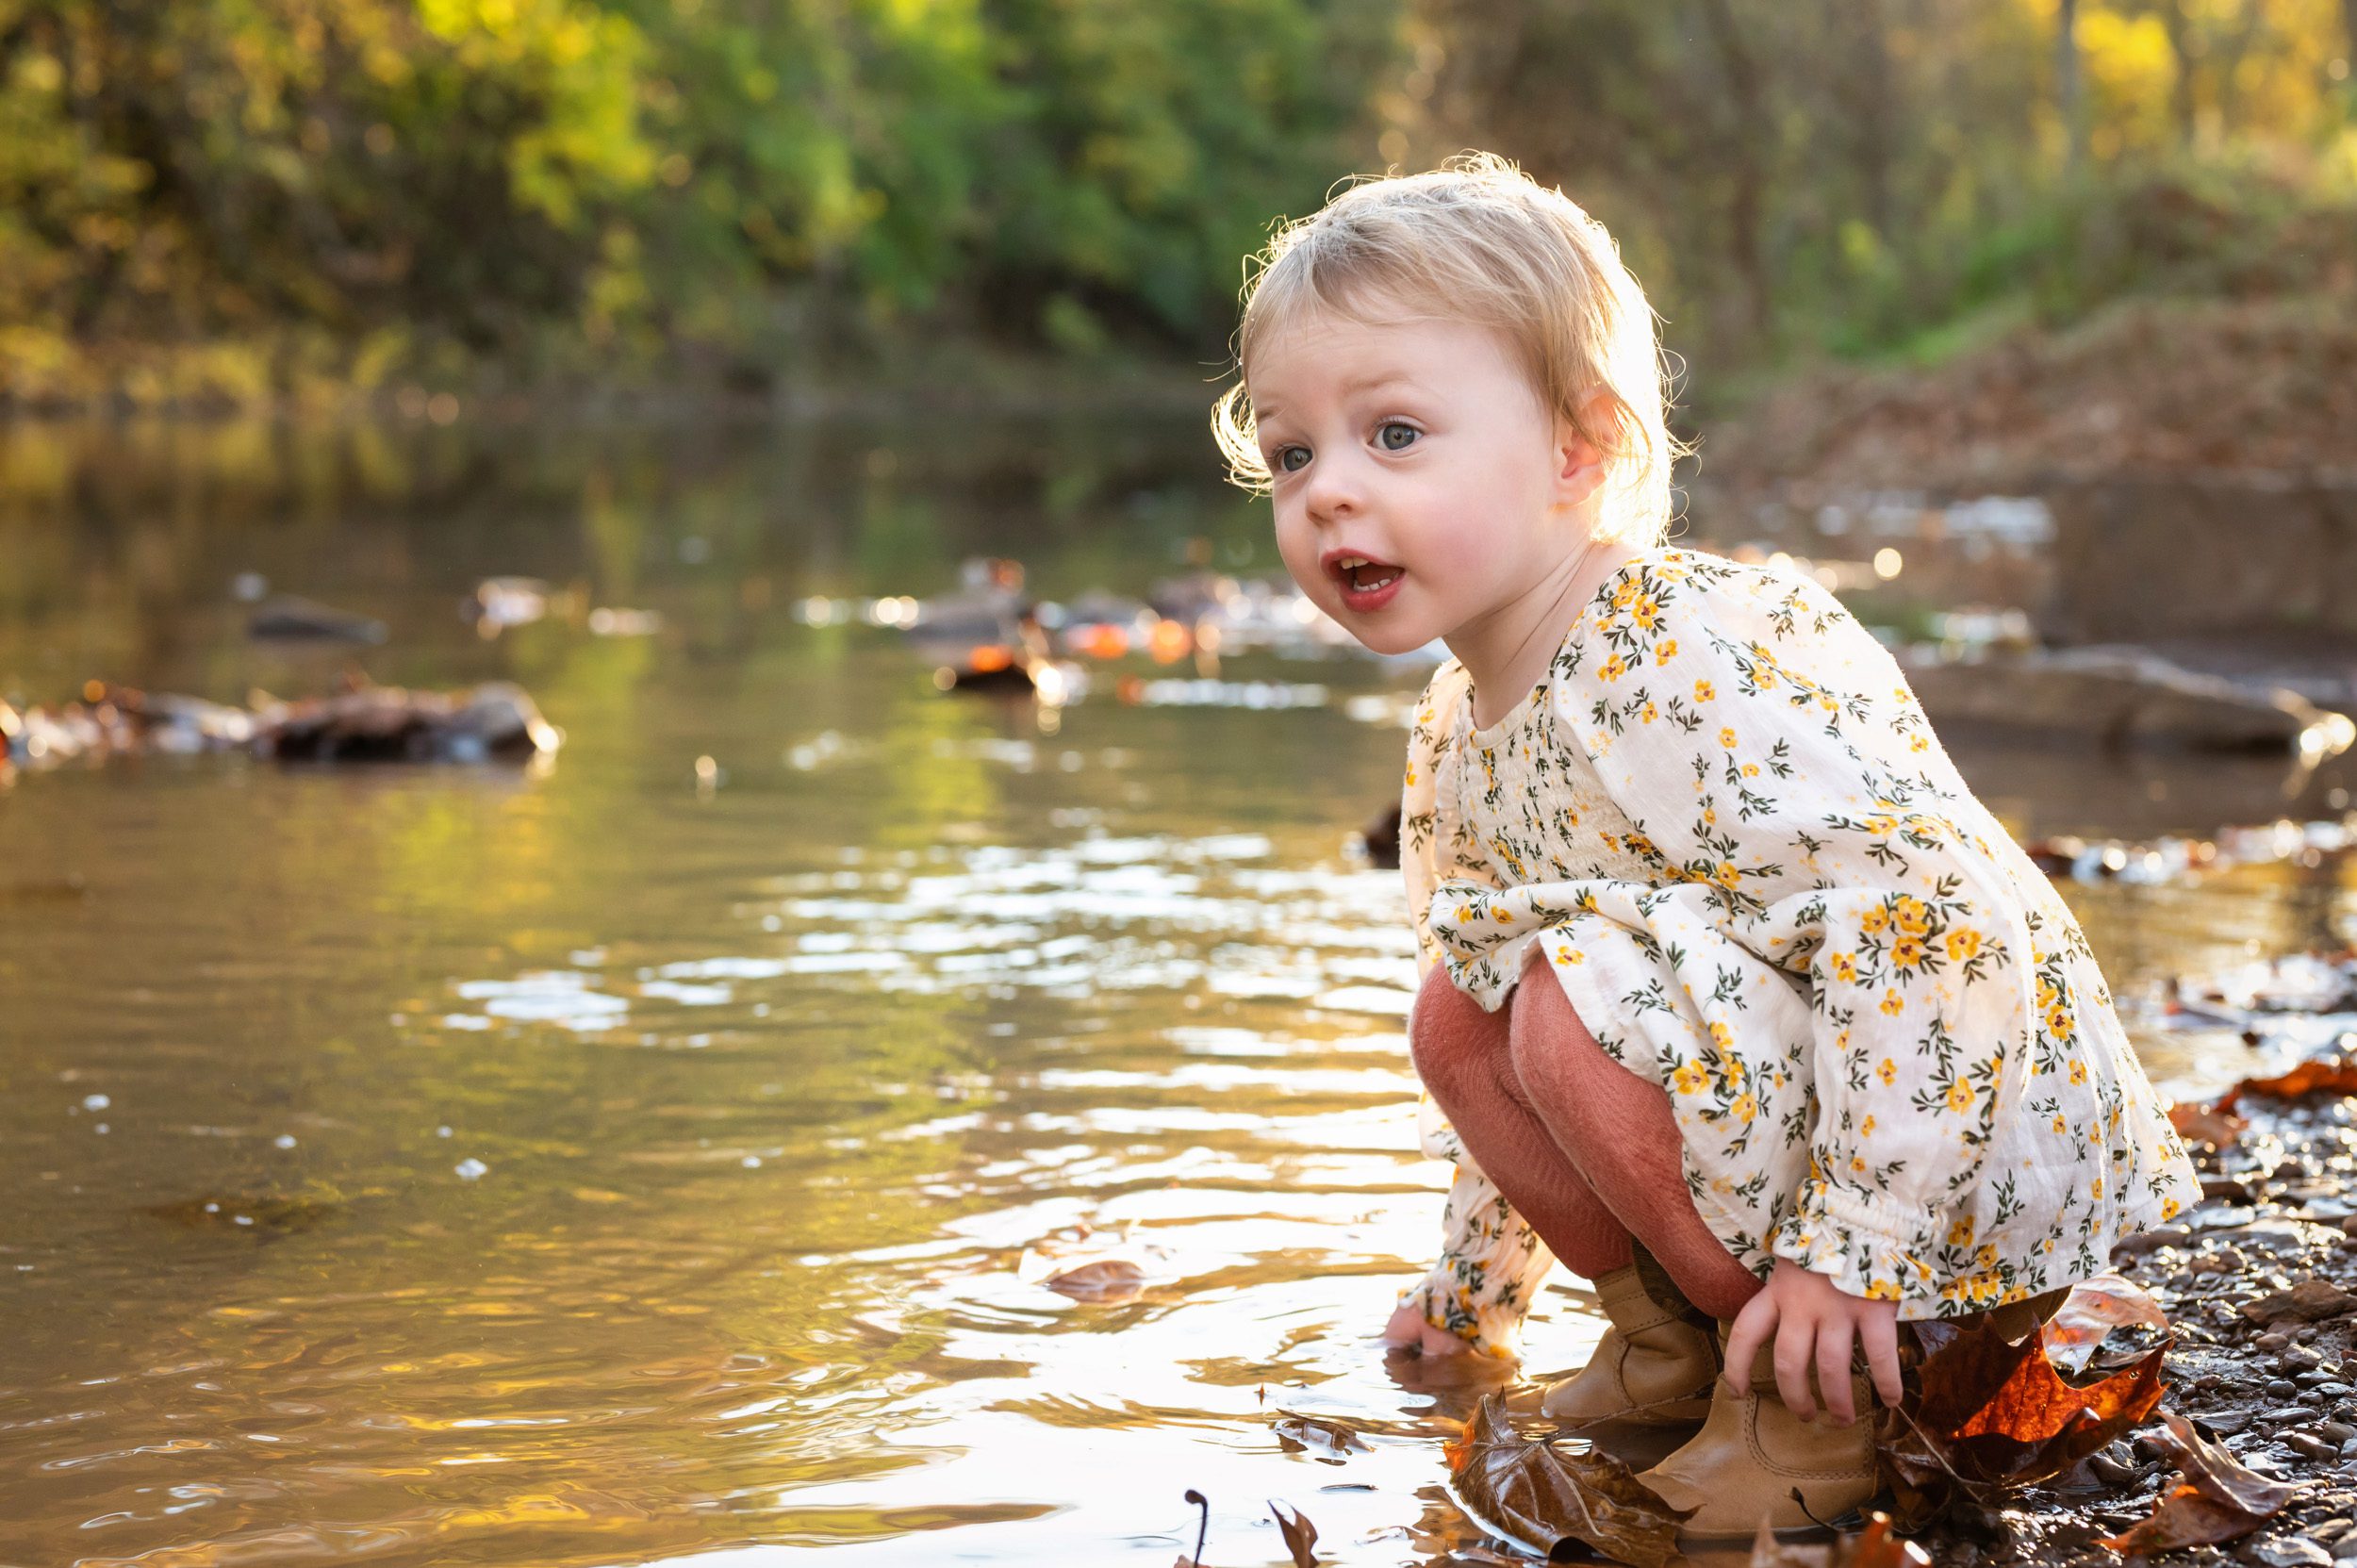 Close up picture of a young girl dipping her fingers into a creek and looking up with a surprised expression during a family photoshoot